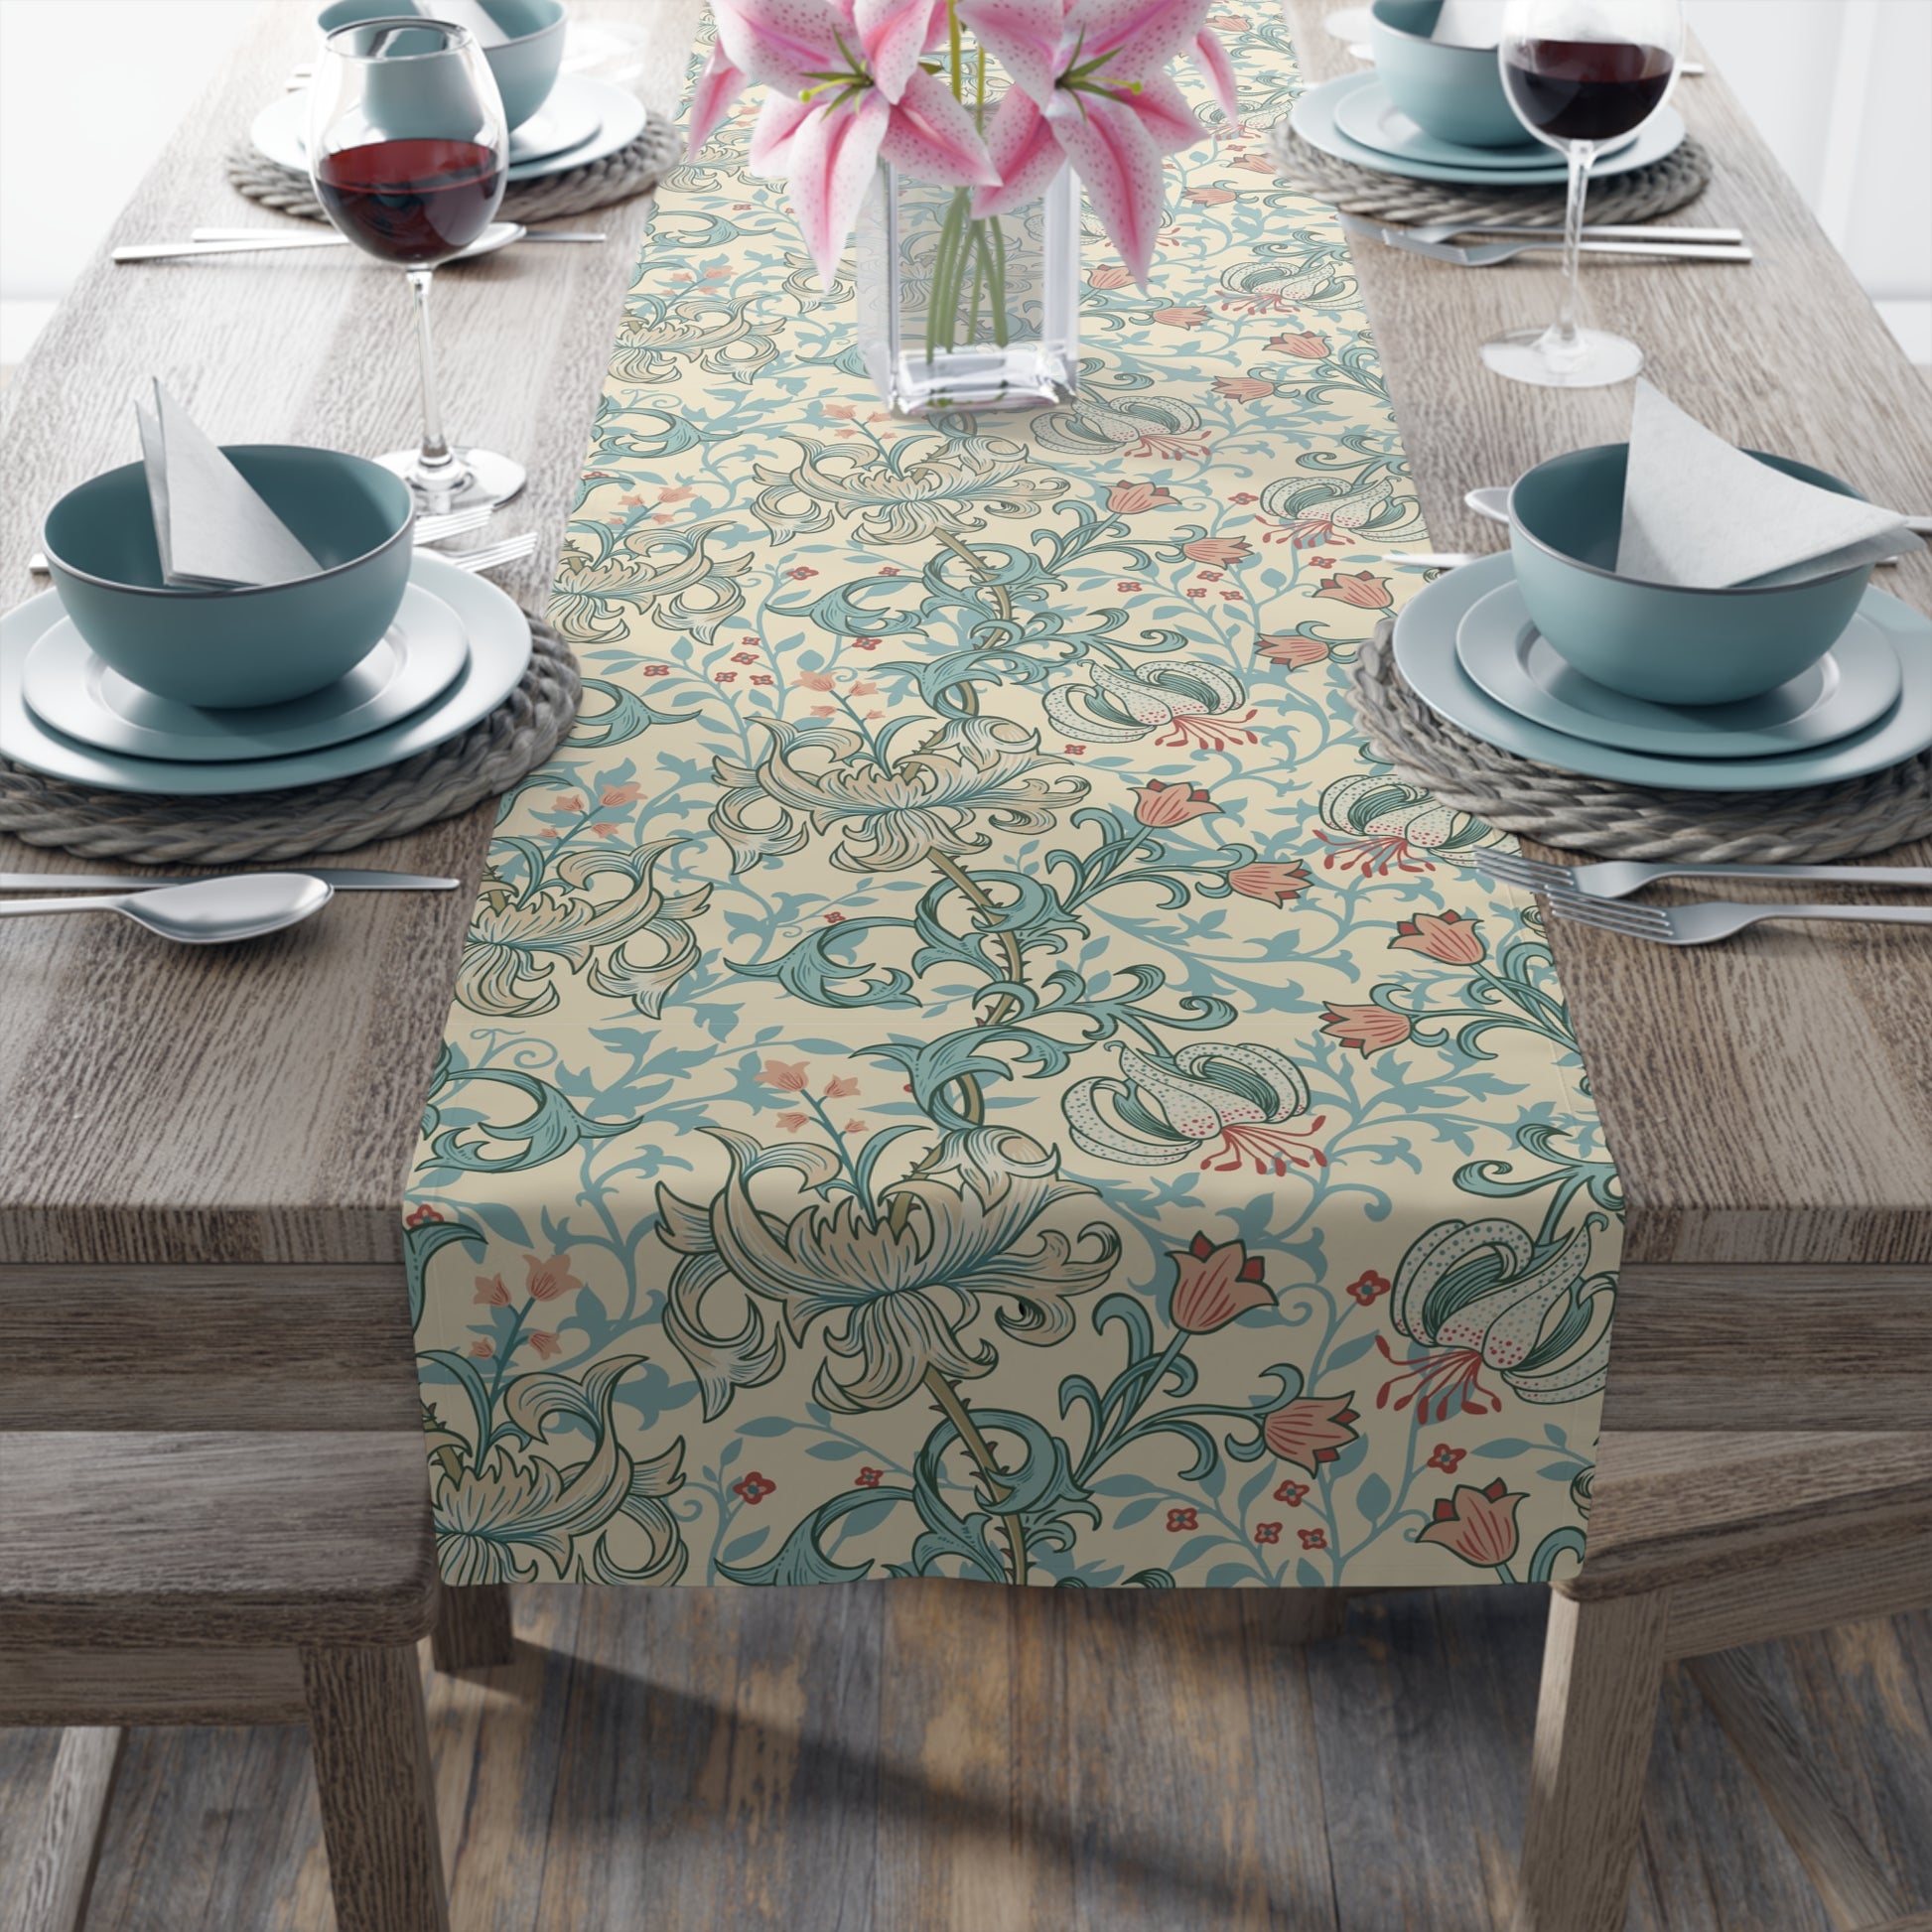 william-morris-co-table-runner-golden-lily-collection-mineral-9